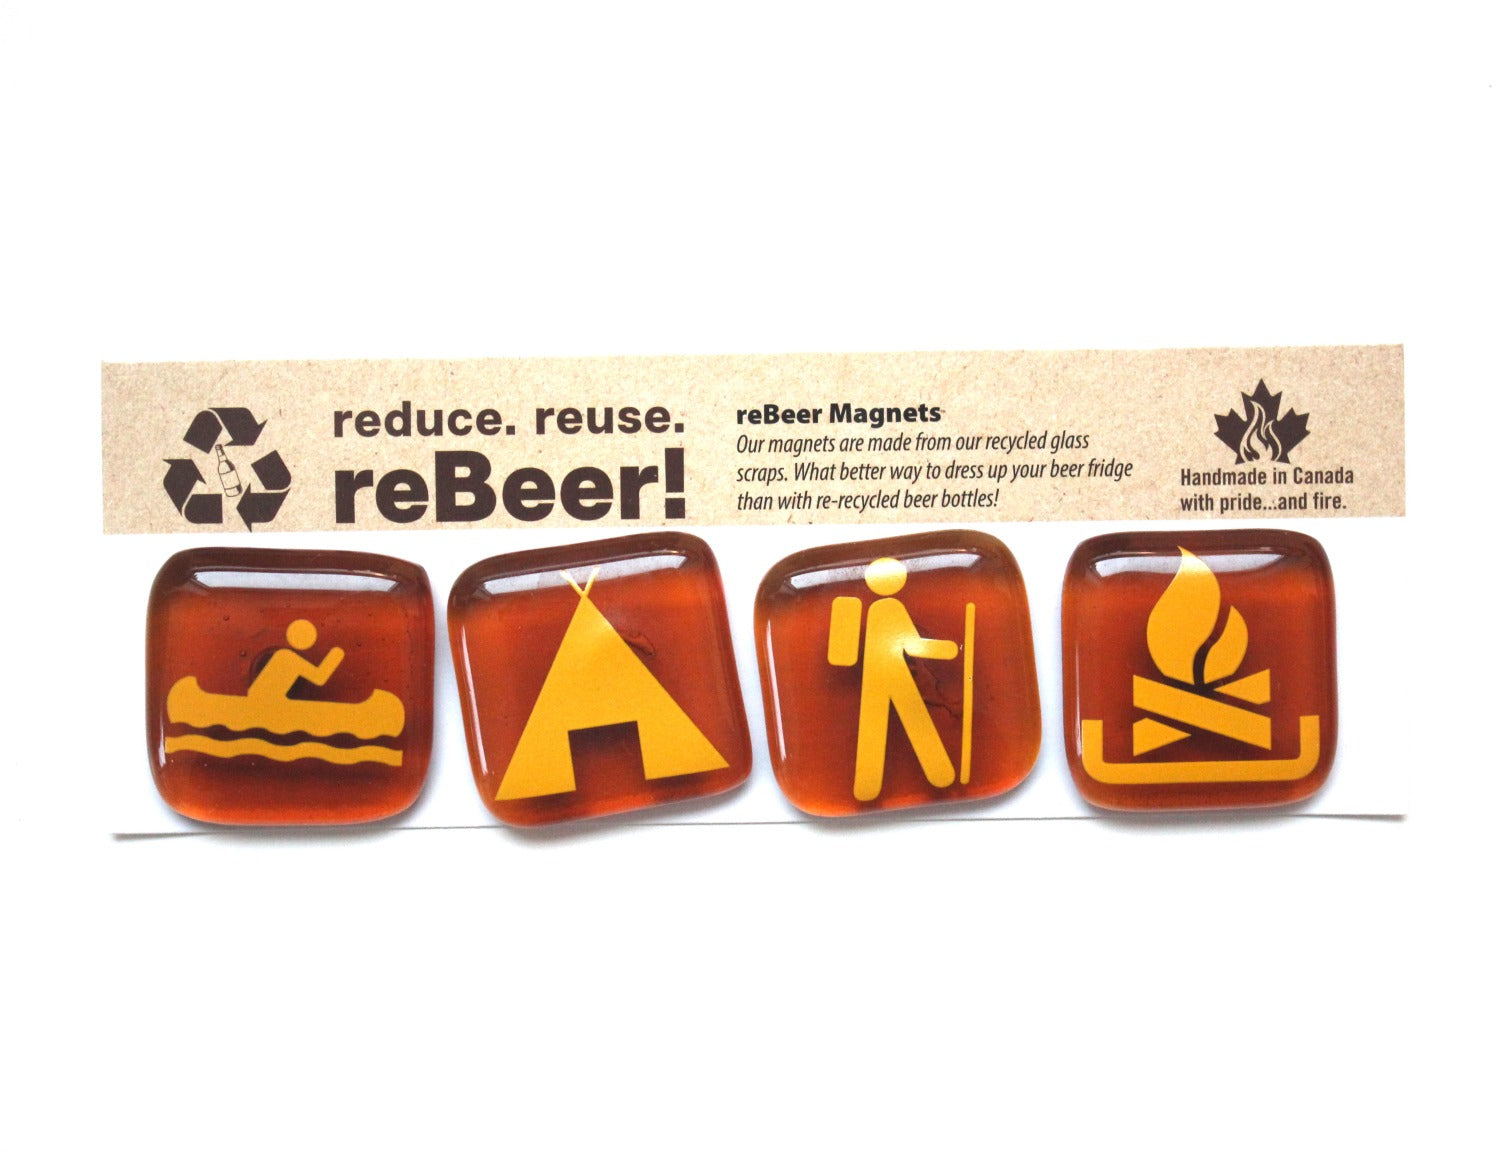 Made in Canada recycled beer bottle amber coloured magnets with yellow camping symbols of a tent, hiker, canoe and fire.